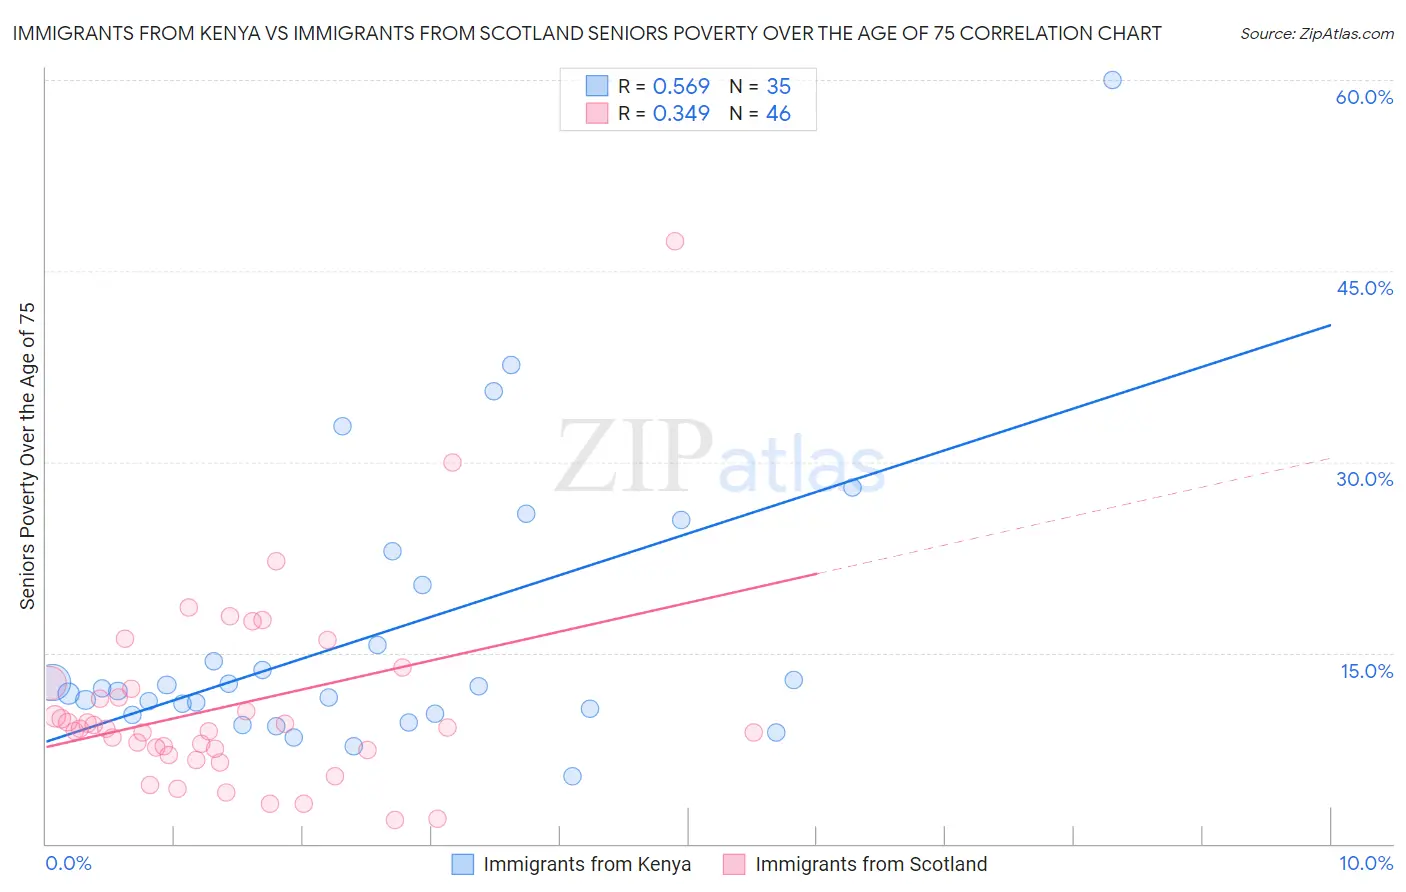 Immigrants from Kenya vs Immigrants from Scotland Seniors Poverty Over the Age of 75